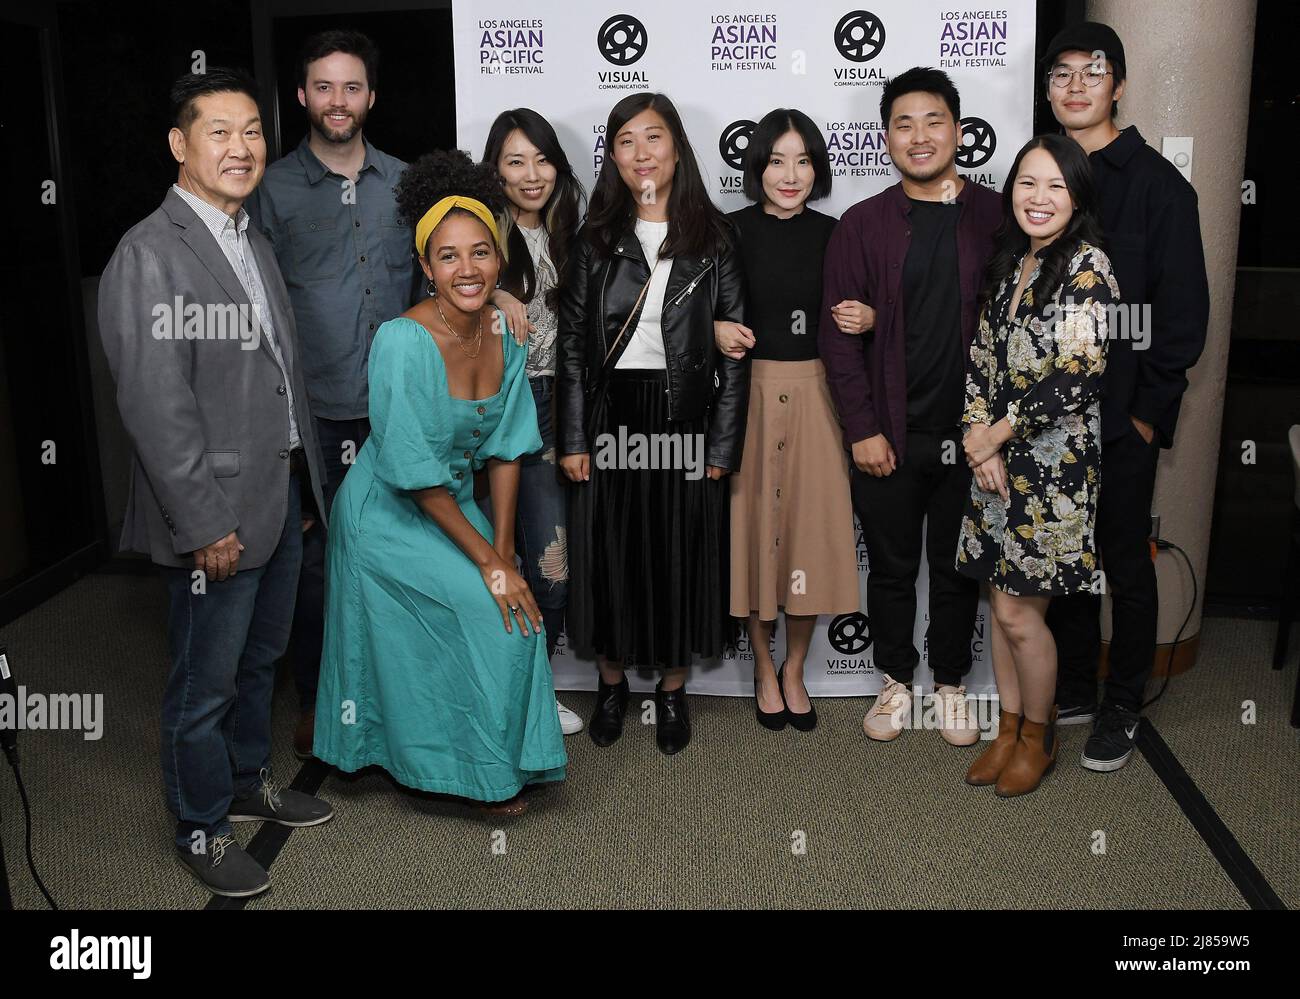 Los Angeles, USA. 12th May, 2022. (L-R) DAWNING Cast & Crew - Felix Park, Composer Alex Winkler, Philicia Saunders, Veronica Kim, Editor Yejin Oh, Kim Ellis, Director Young Min Kim, Vyvy Nguyen and DP Tim Toda at the 38th Los Angeles Asian Pacific Film Festival - DAWNING Premiere held at the Aratani Theatre at JACCC in Los Angeles, CA on Thursday, ?May 12, 2022. (Photo By Sthanlee B. Mirador/Sipa USA) Credit: Sipa USA/Alamy Live News Stock Photo